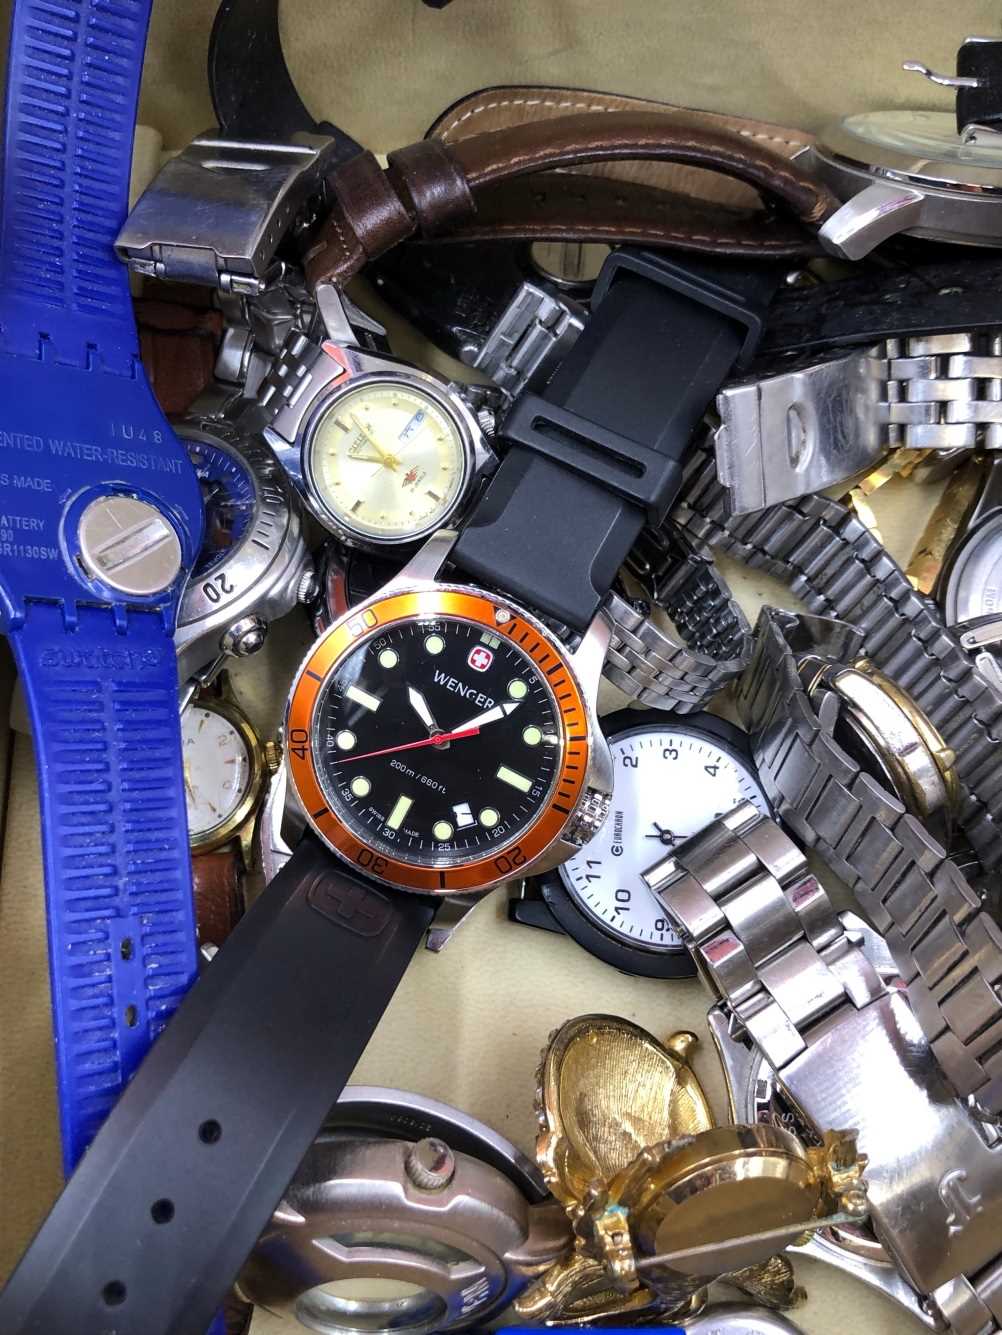 A collection of wristwatches to include Fossil, Casio, D&G, Focus, Sekonda, Storm, Samsung Gear S2 - Image 2 of 5